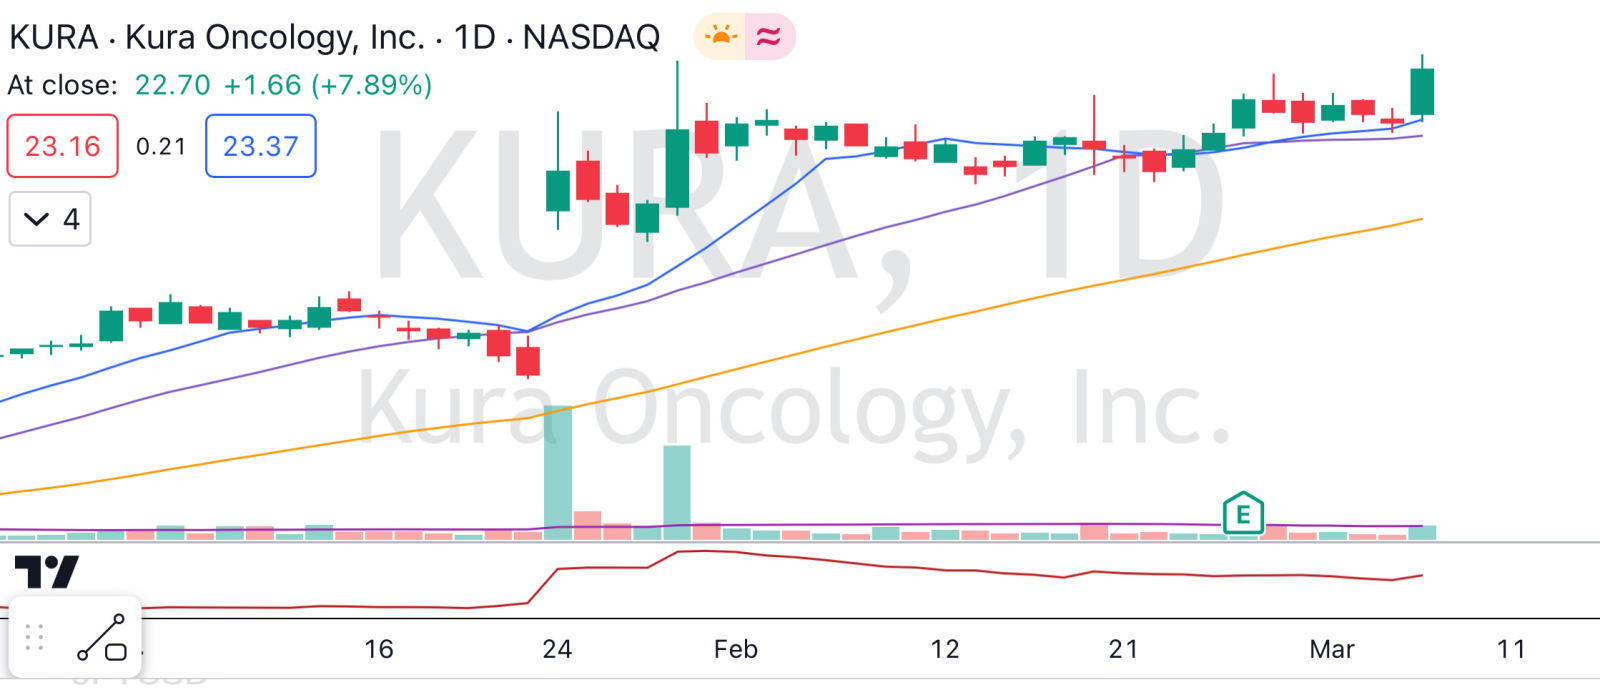 I like the g/up base with low vol, especially after earnings. High RS98. $Kura Oncology (KURA.US)$